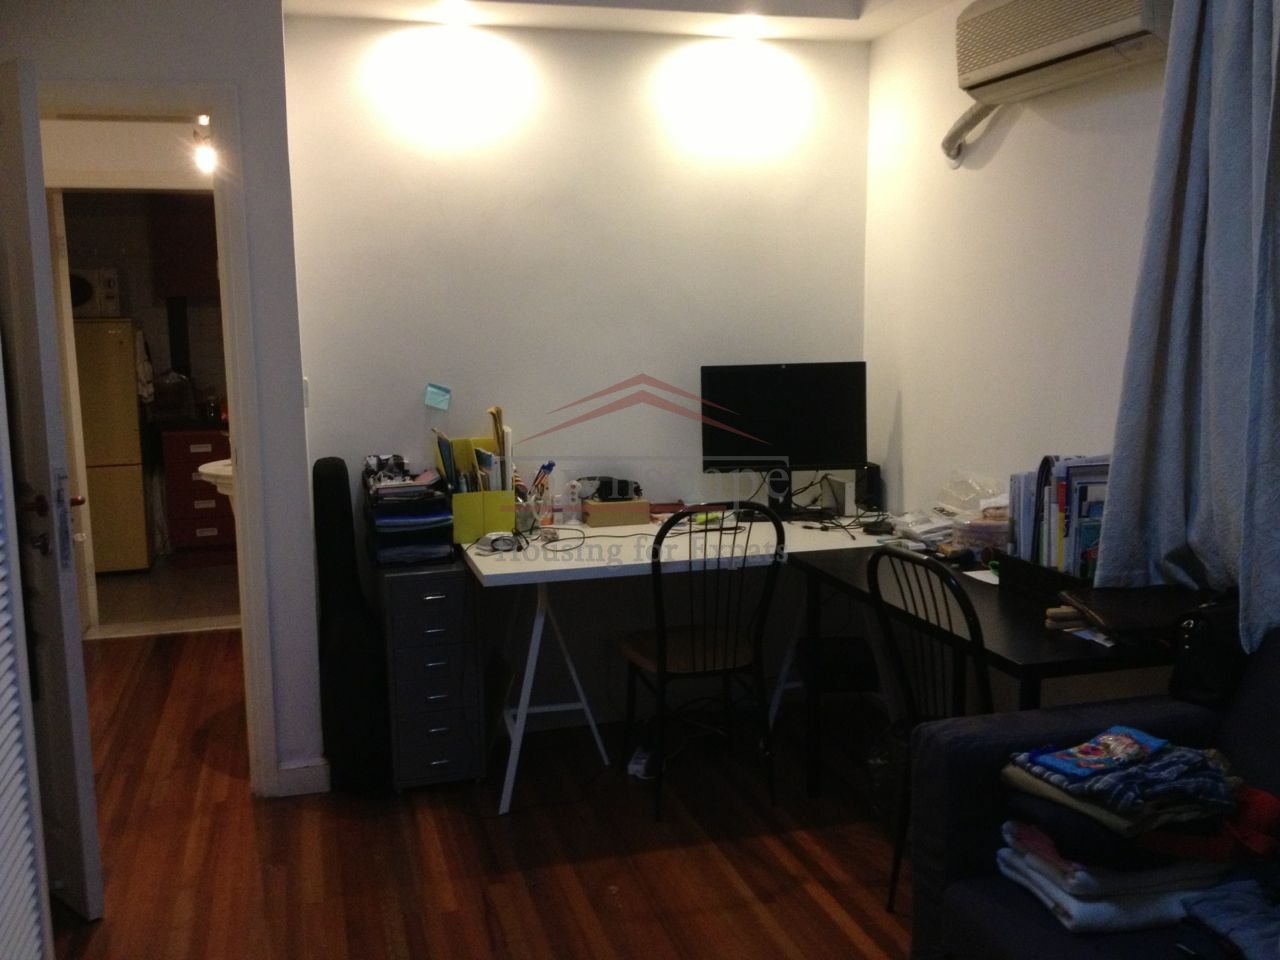 Shanghai French Concession Well Priced 2 Bedroom Lane House w/garden French Concession L1